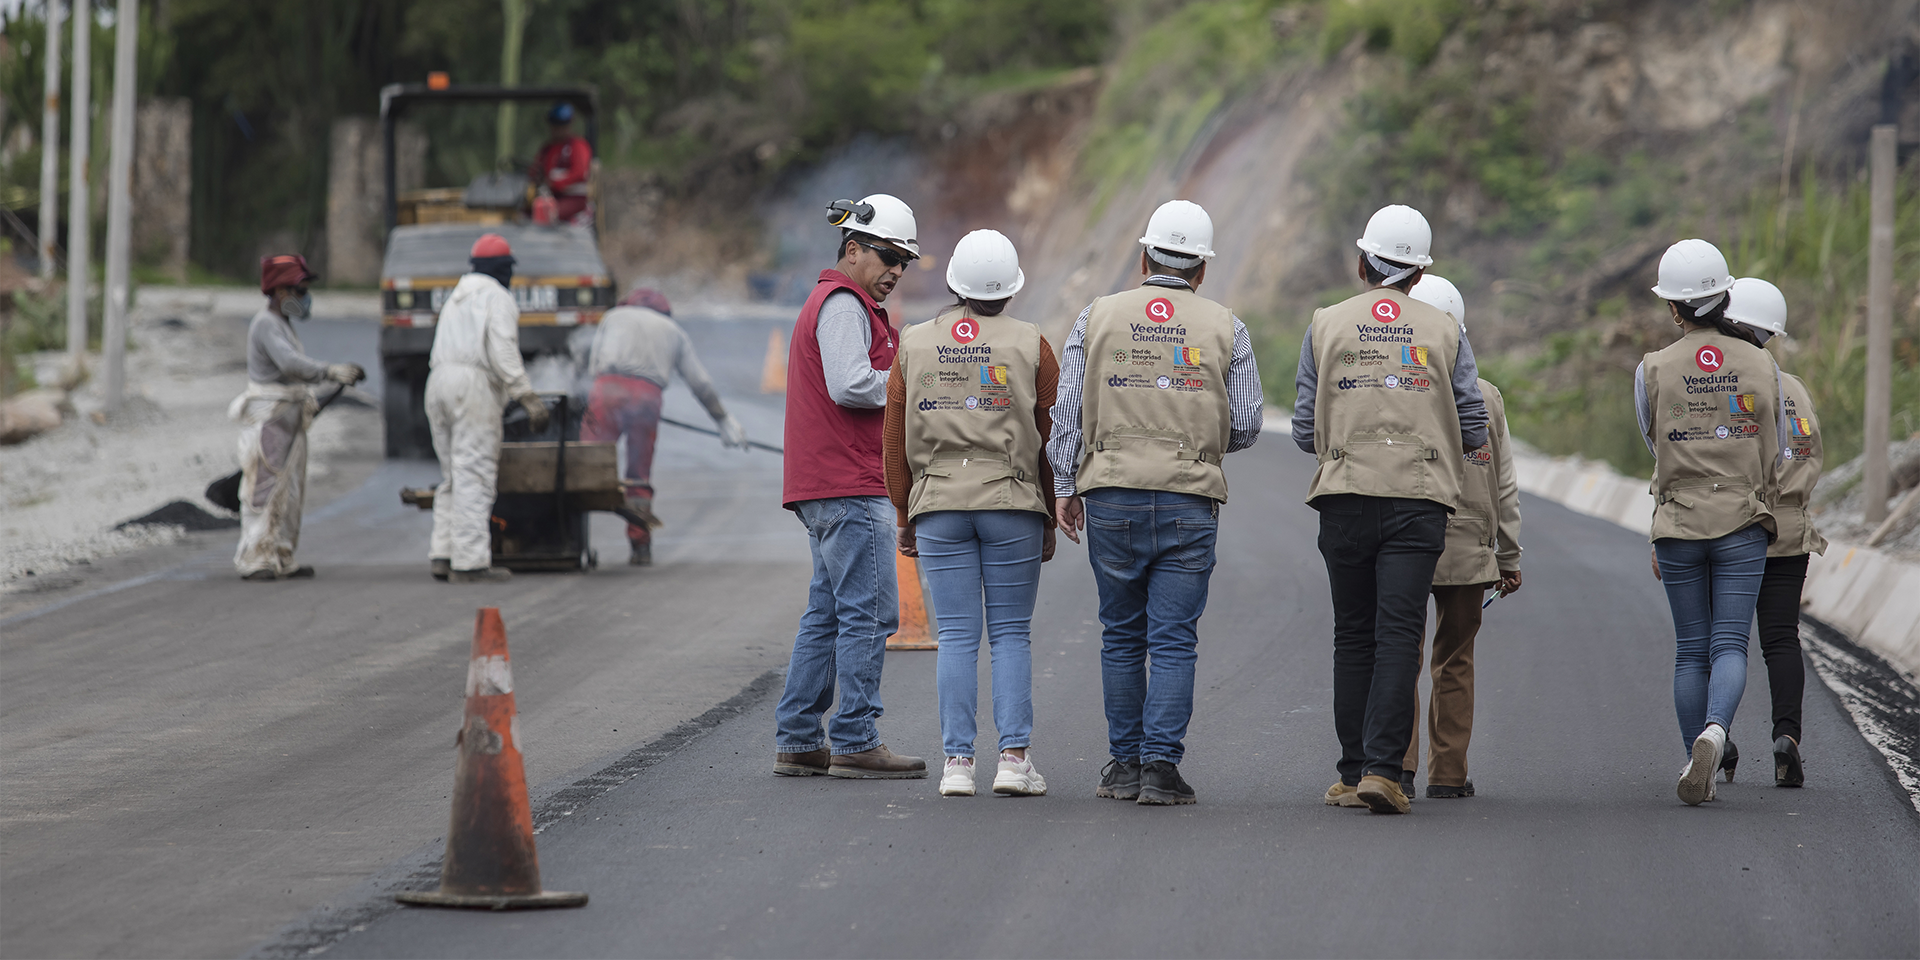 7 people walk up a road with their backs to us in construction helmets.